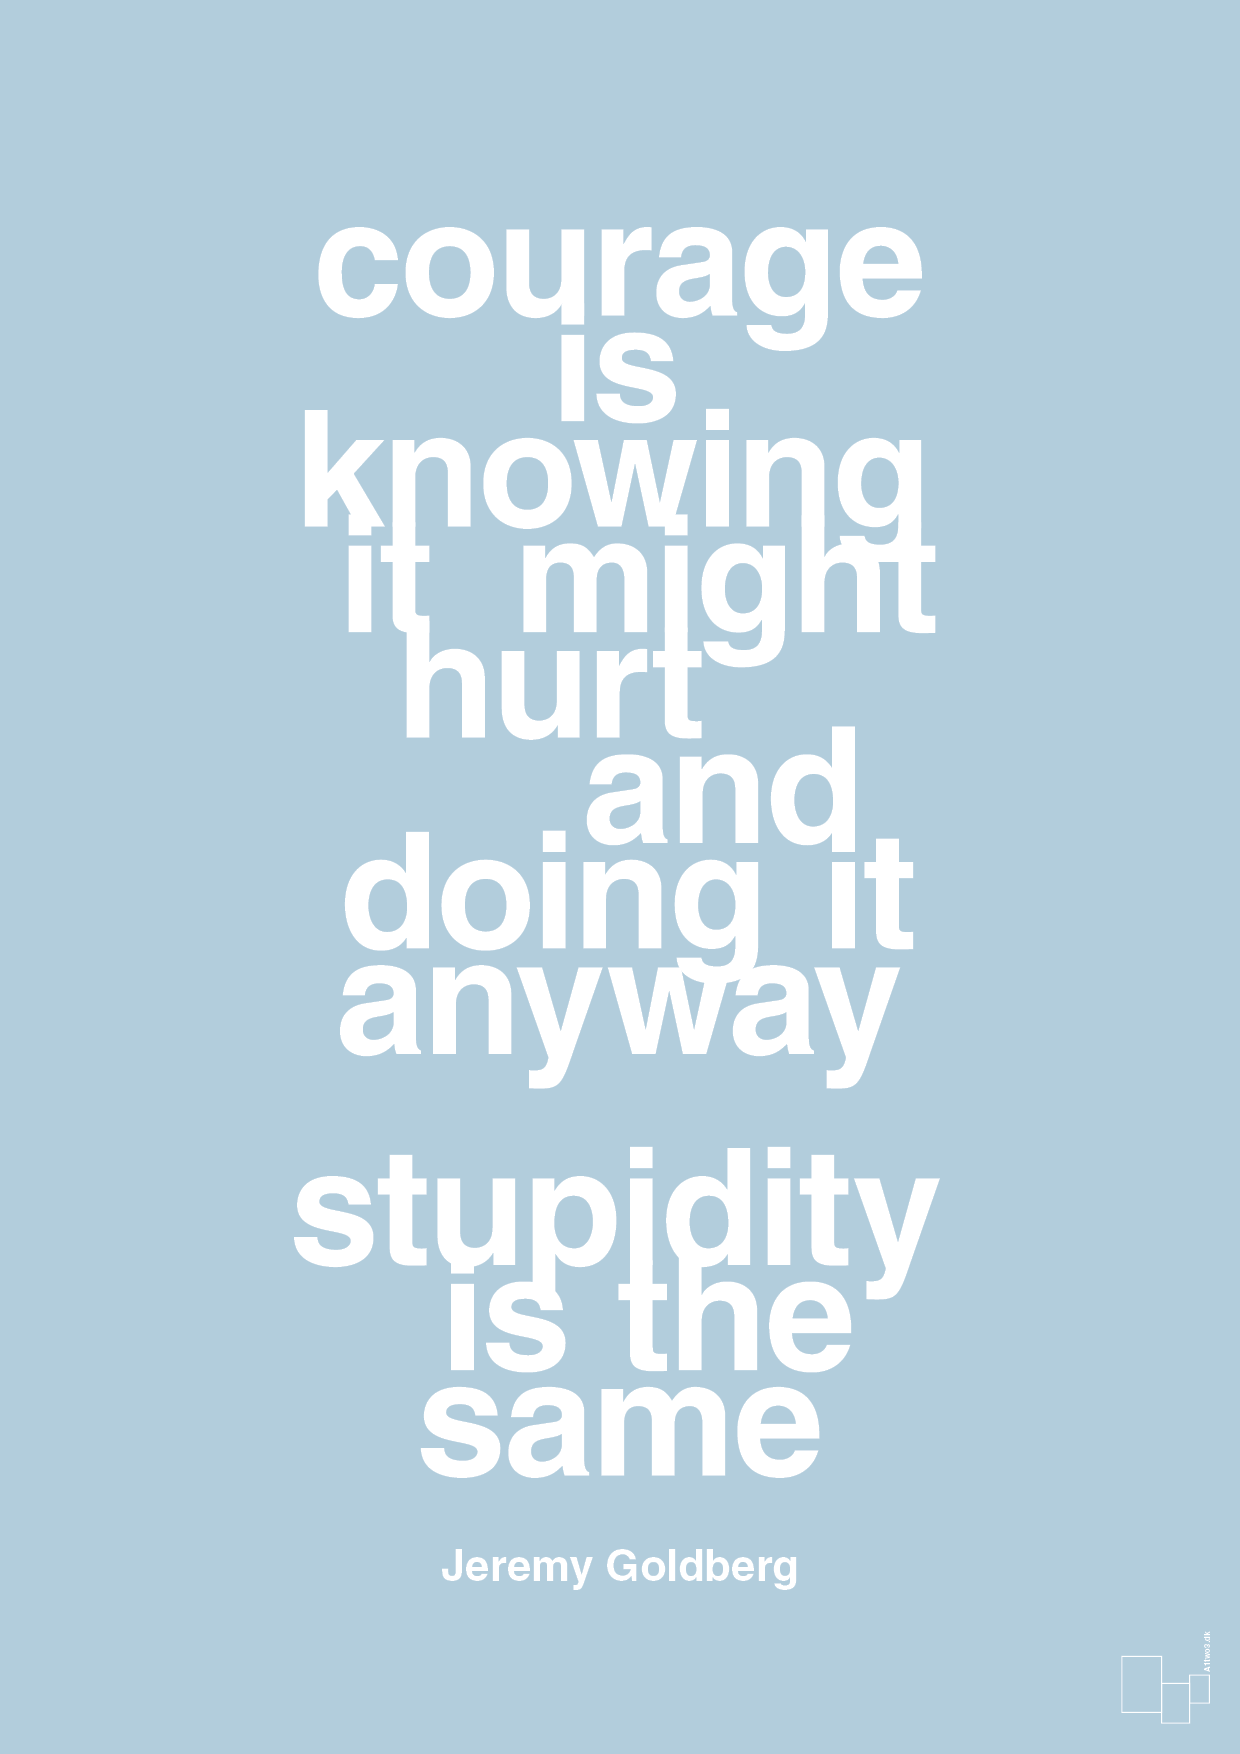 courage is knowing it might hurt and doing it anyway stupidity is the same - Plakat med Citater i Heavenly Blue